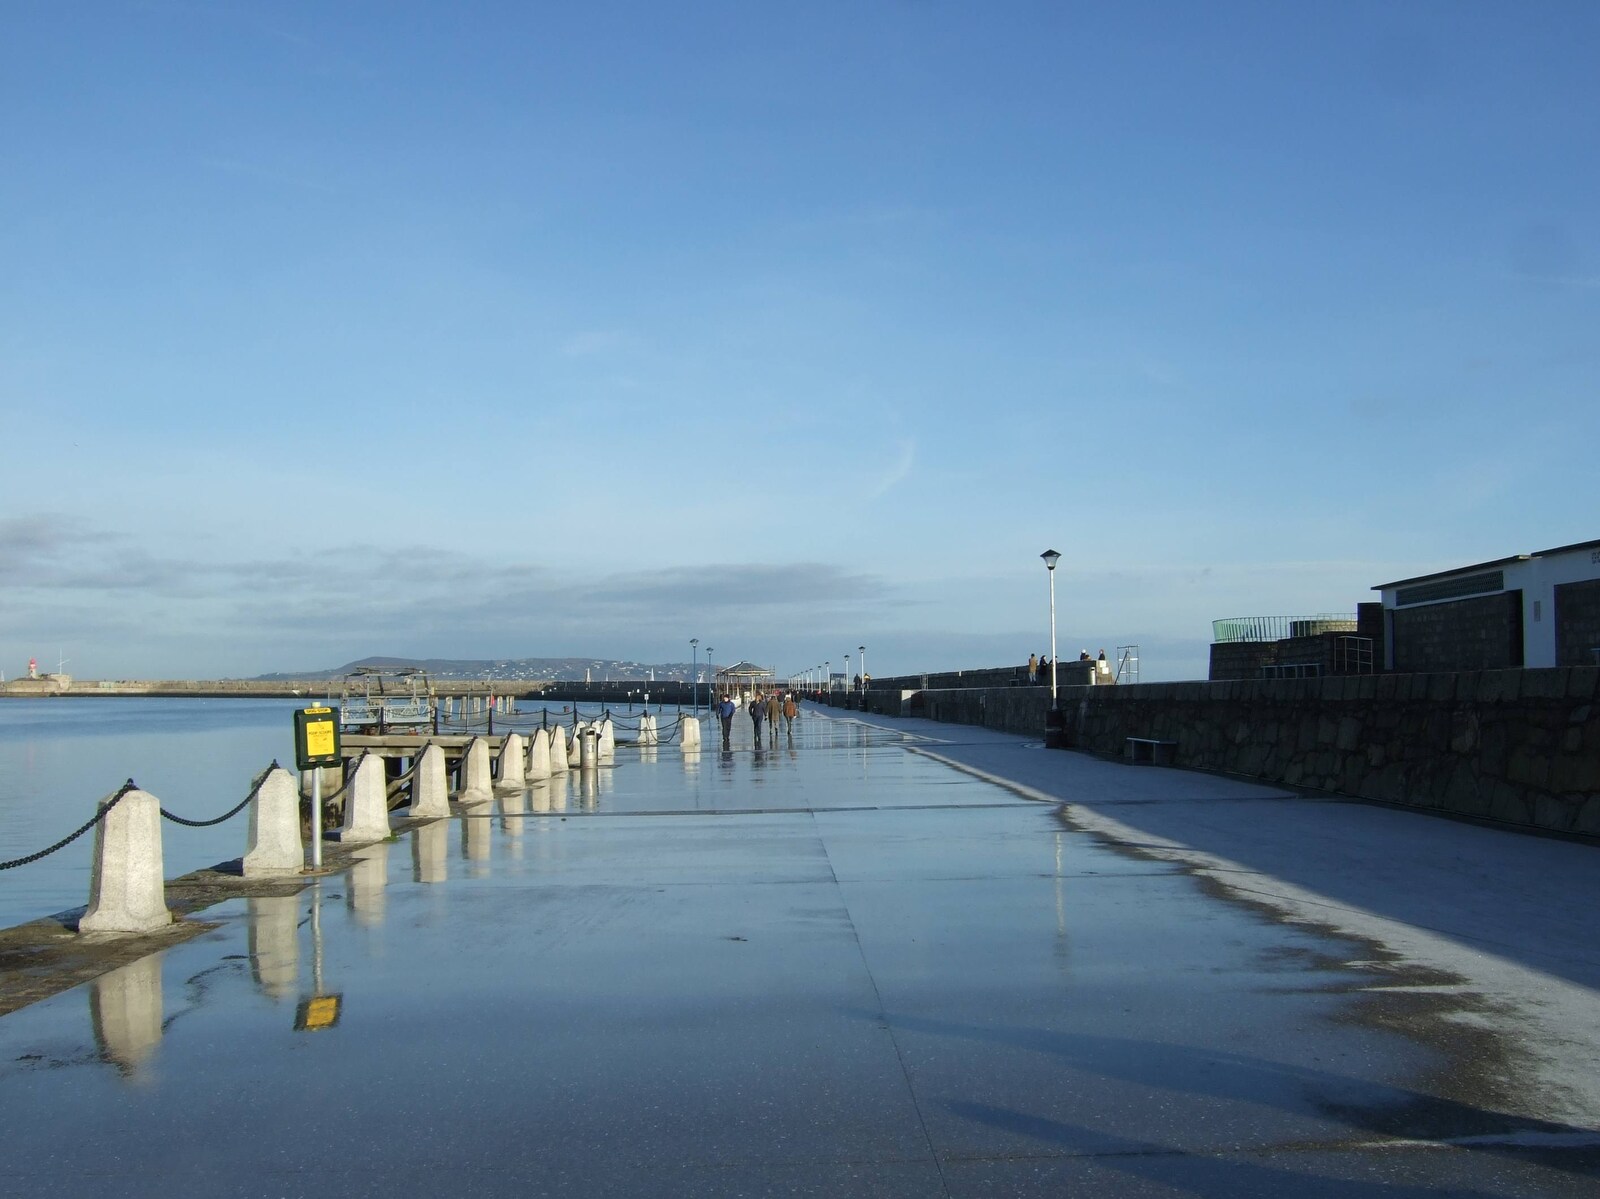 The wet breakwater at Dun Laoghaire from Fred in Blackrock, Dublin, Ireland - 6th December 2008